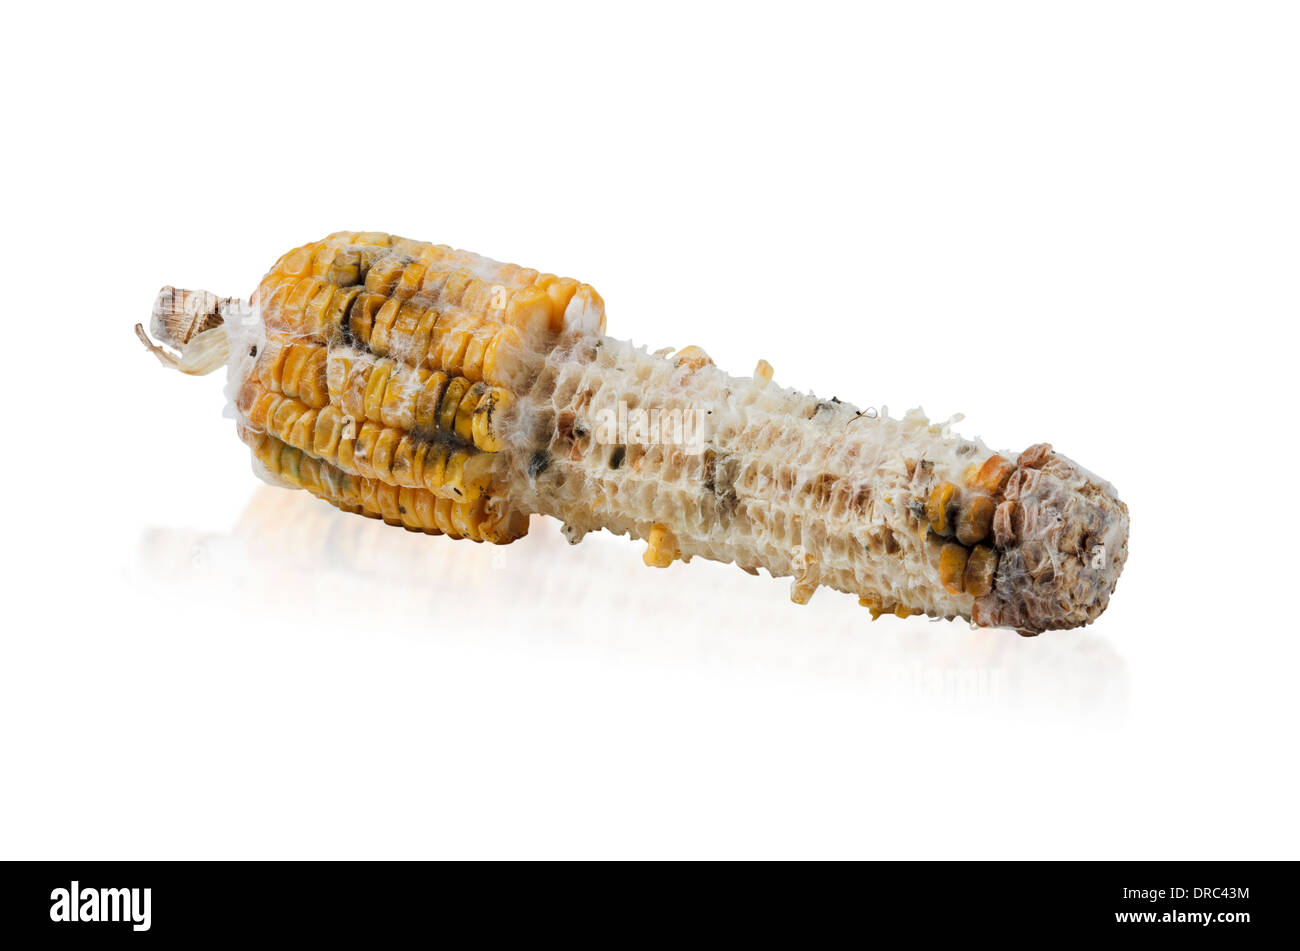 Rotten grilled corn with fungus isolated on white Stock Photo